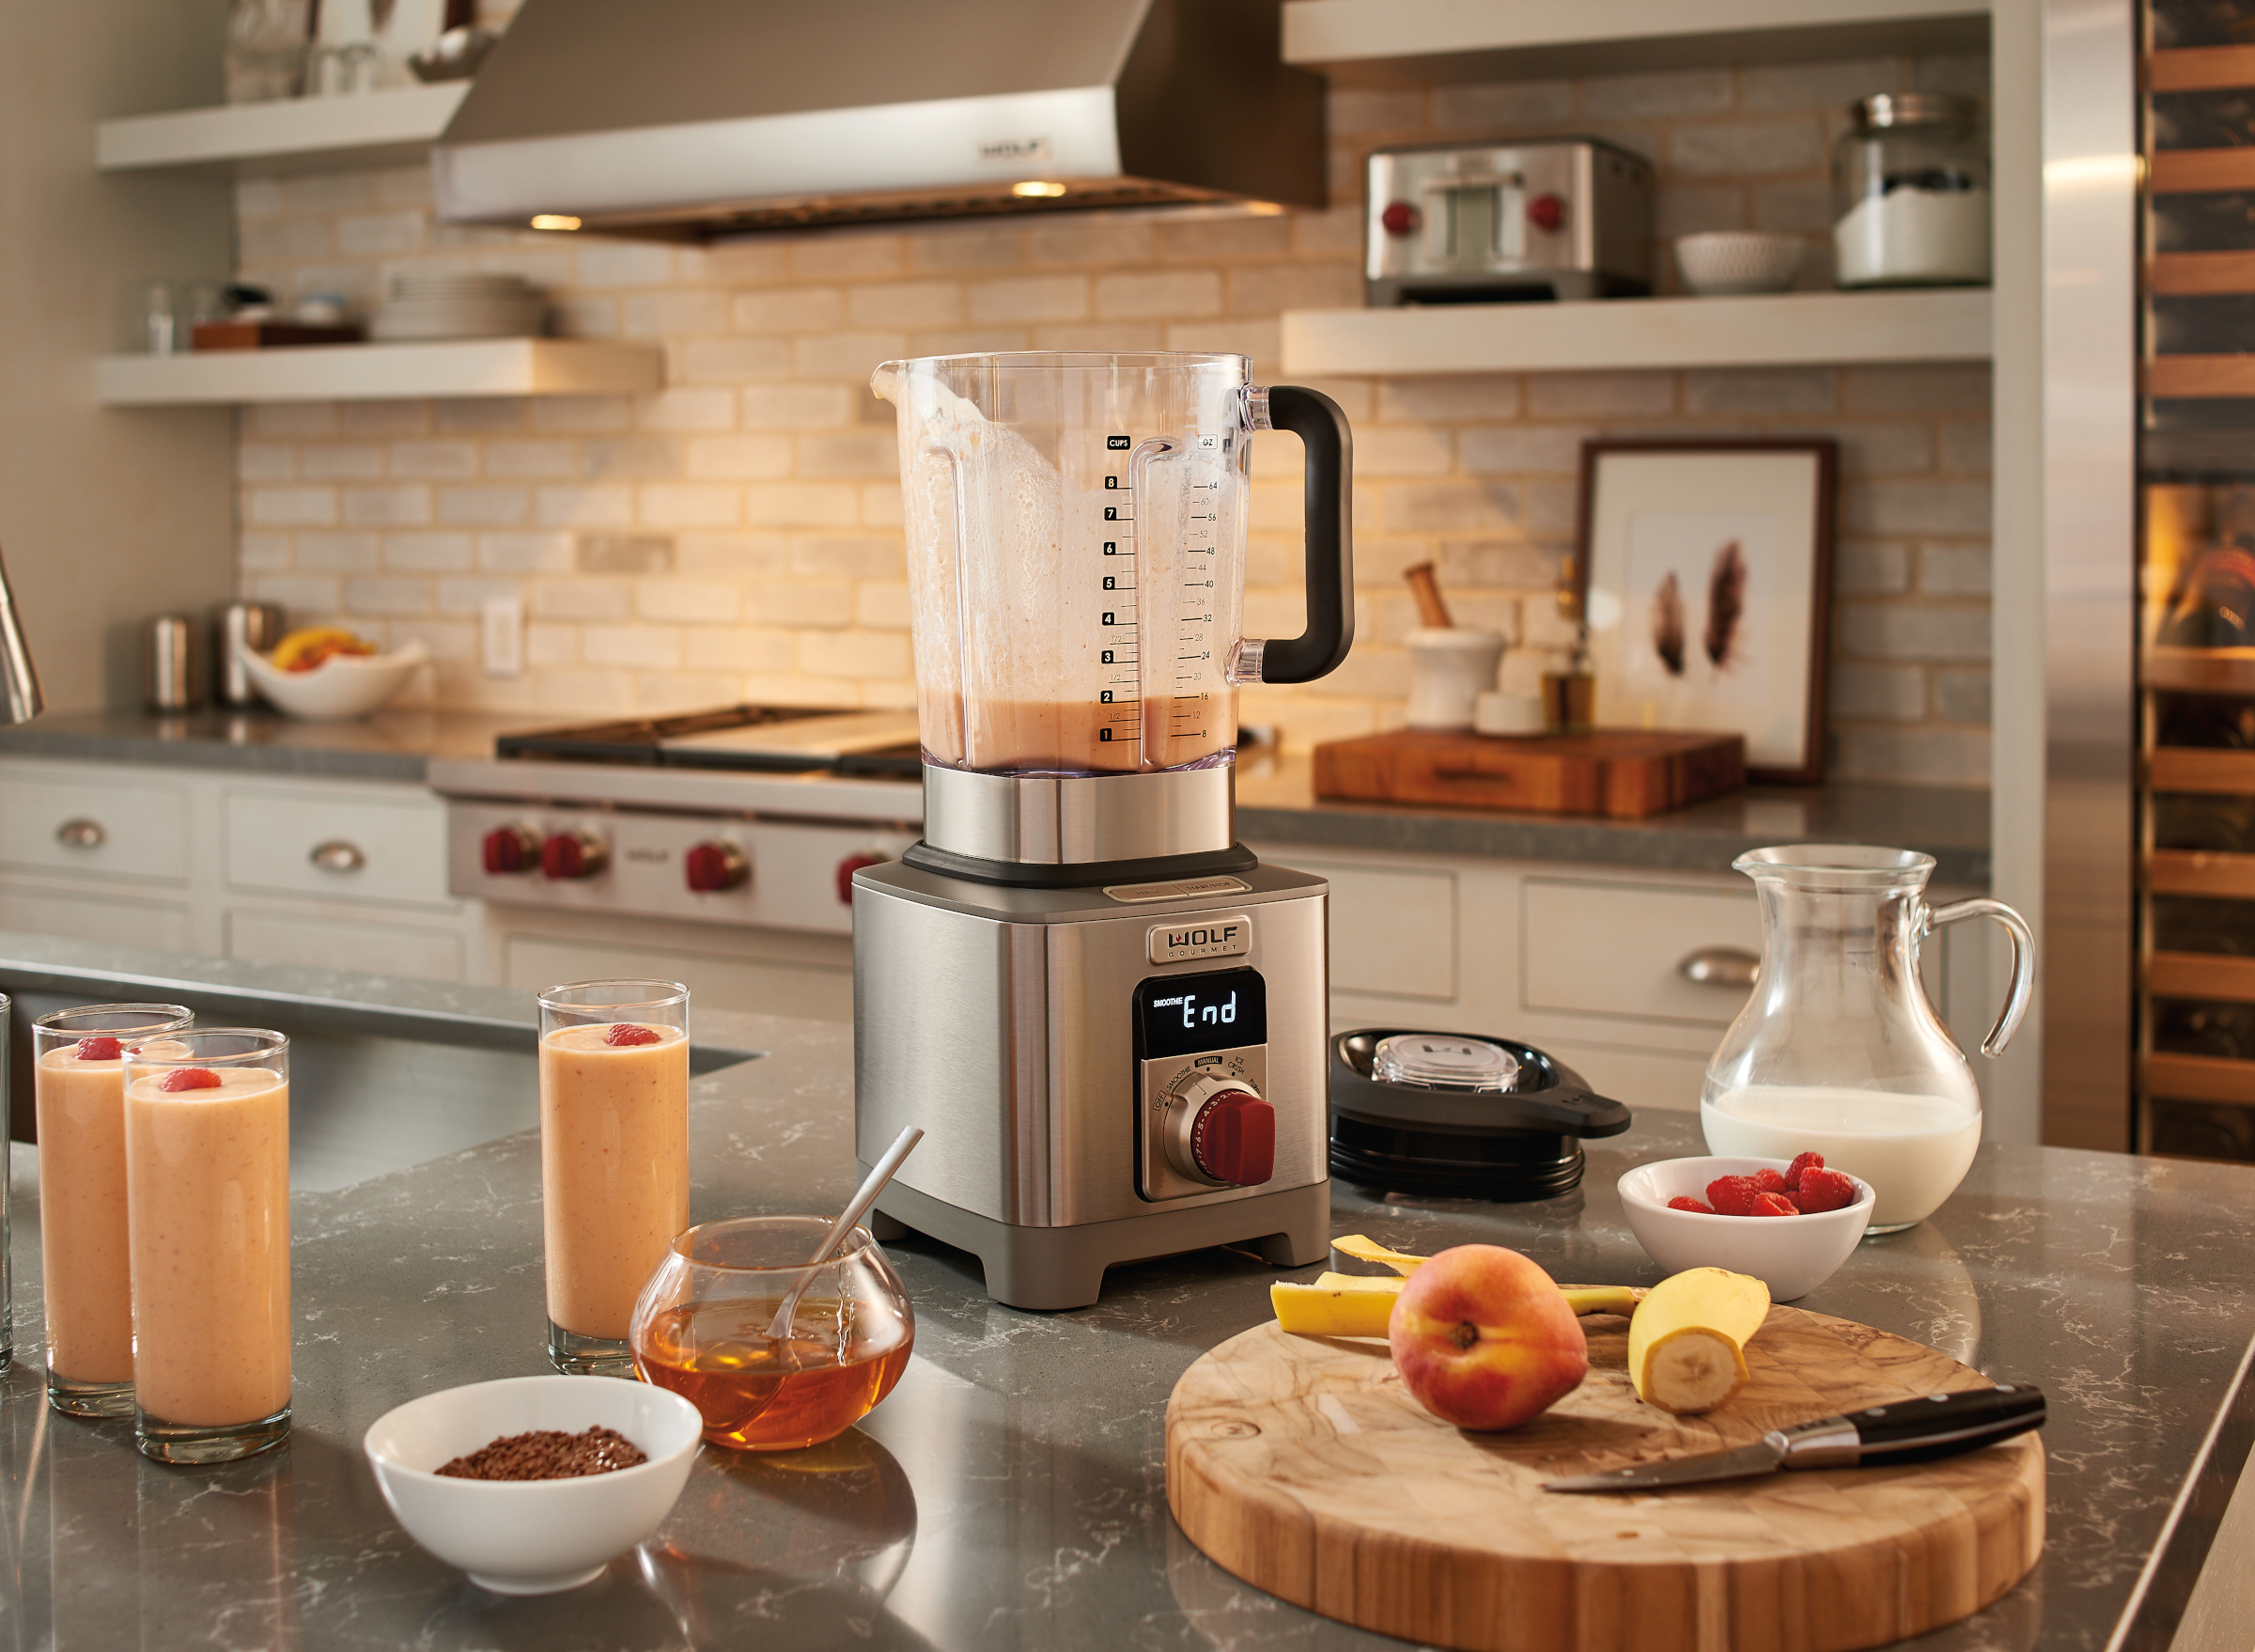 A kitchen counter with Wolf Gourmet blender and smoothies, honey and fresh fruit, and a Wolf range visible in the background.